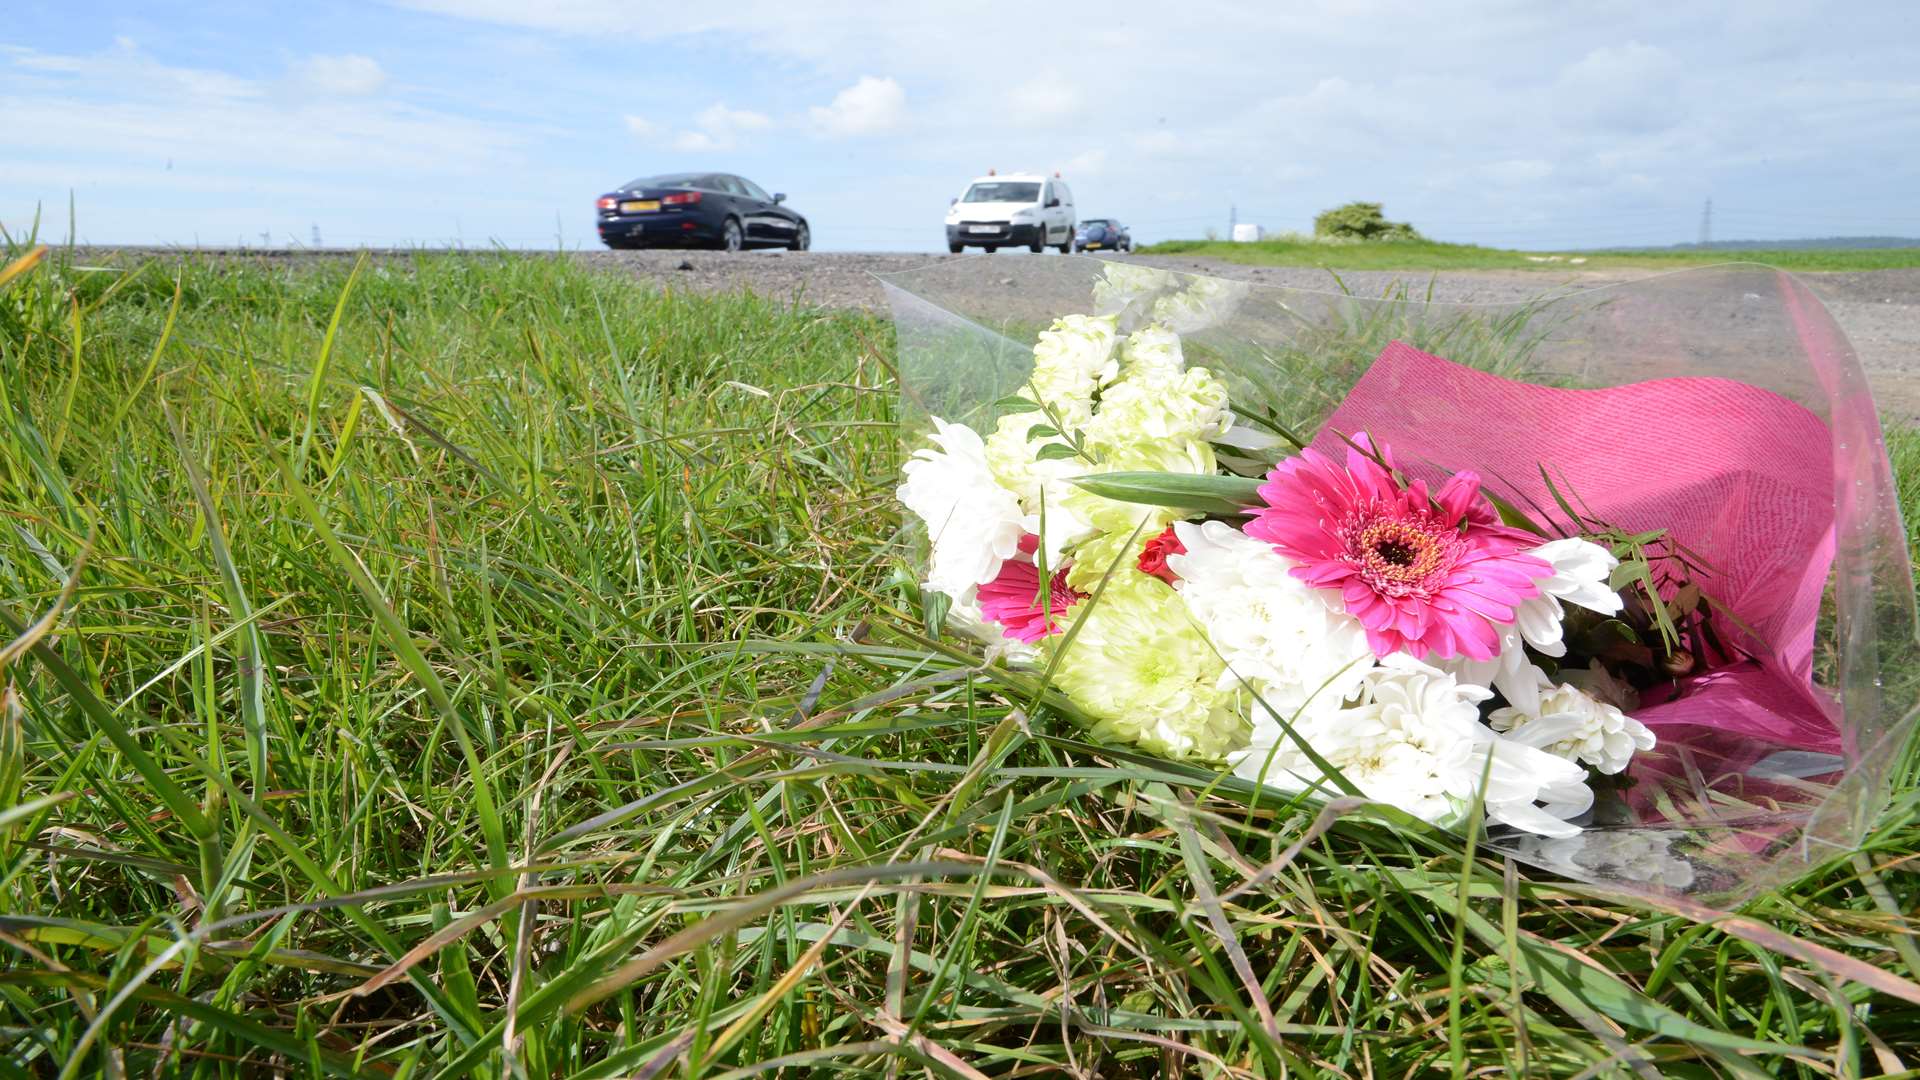 Flowers have been left on the side of the road where the triple fatal crash took place.